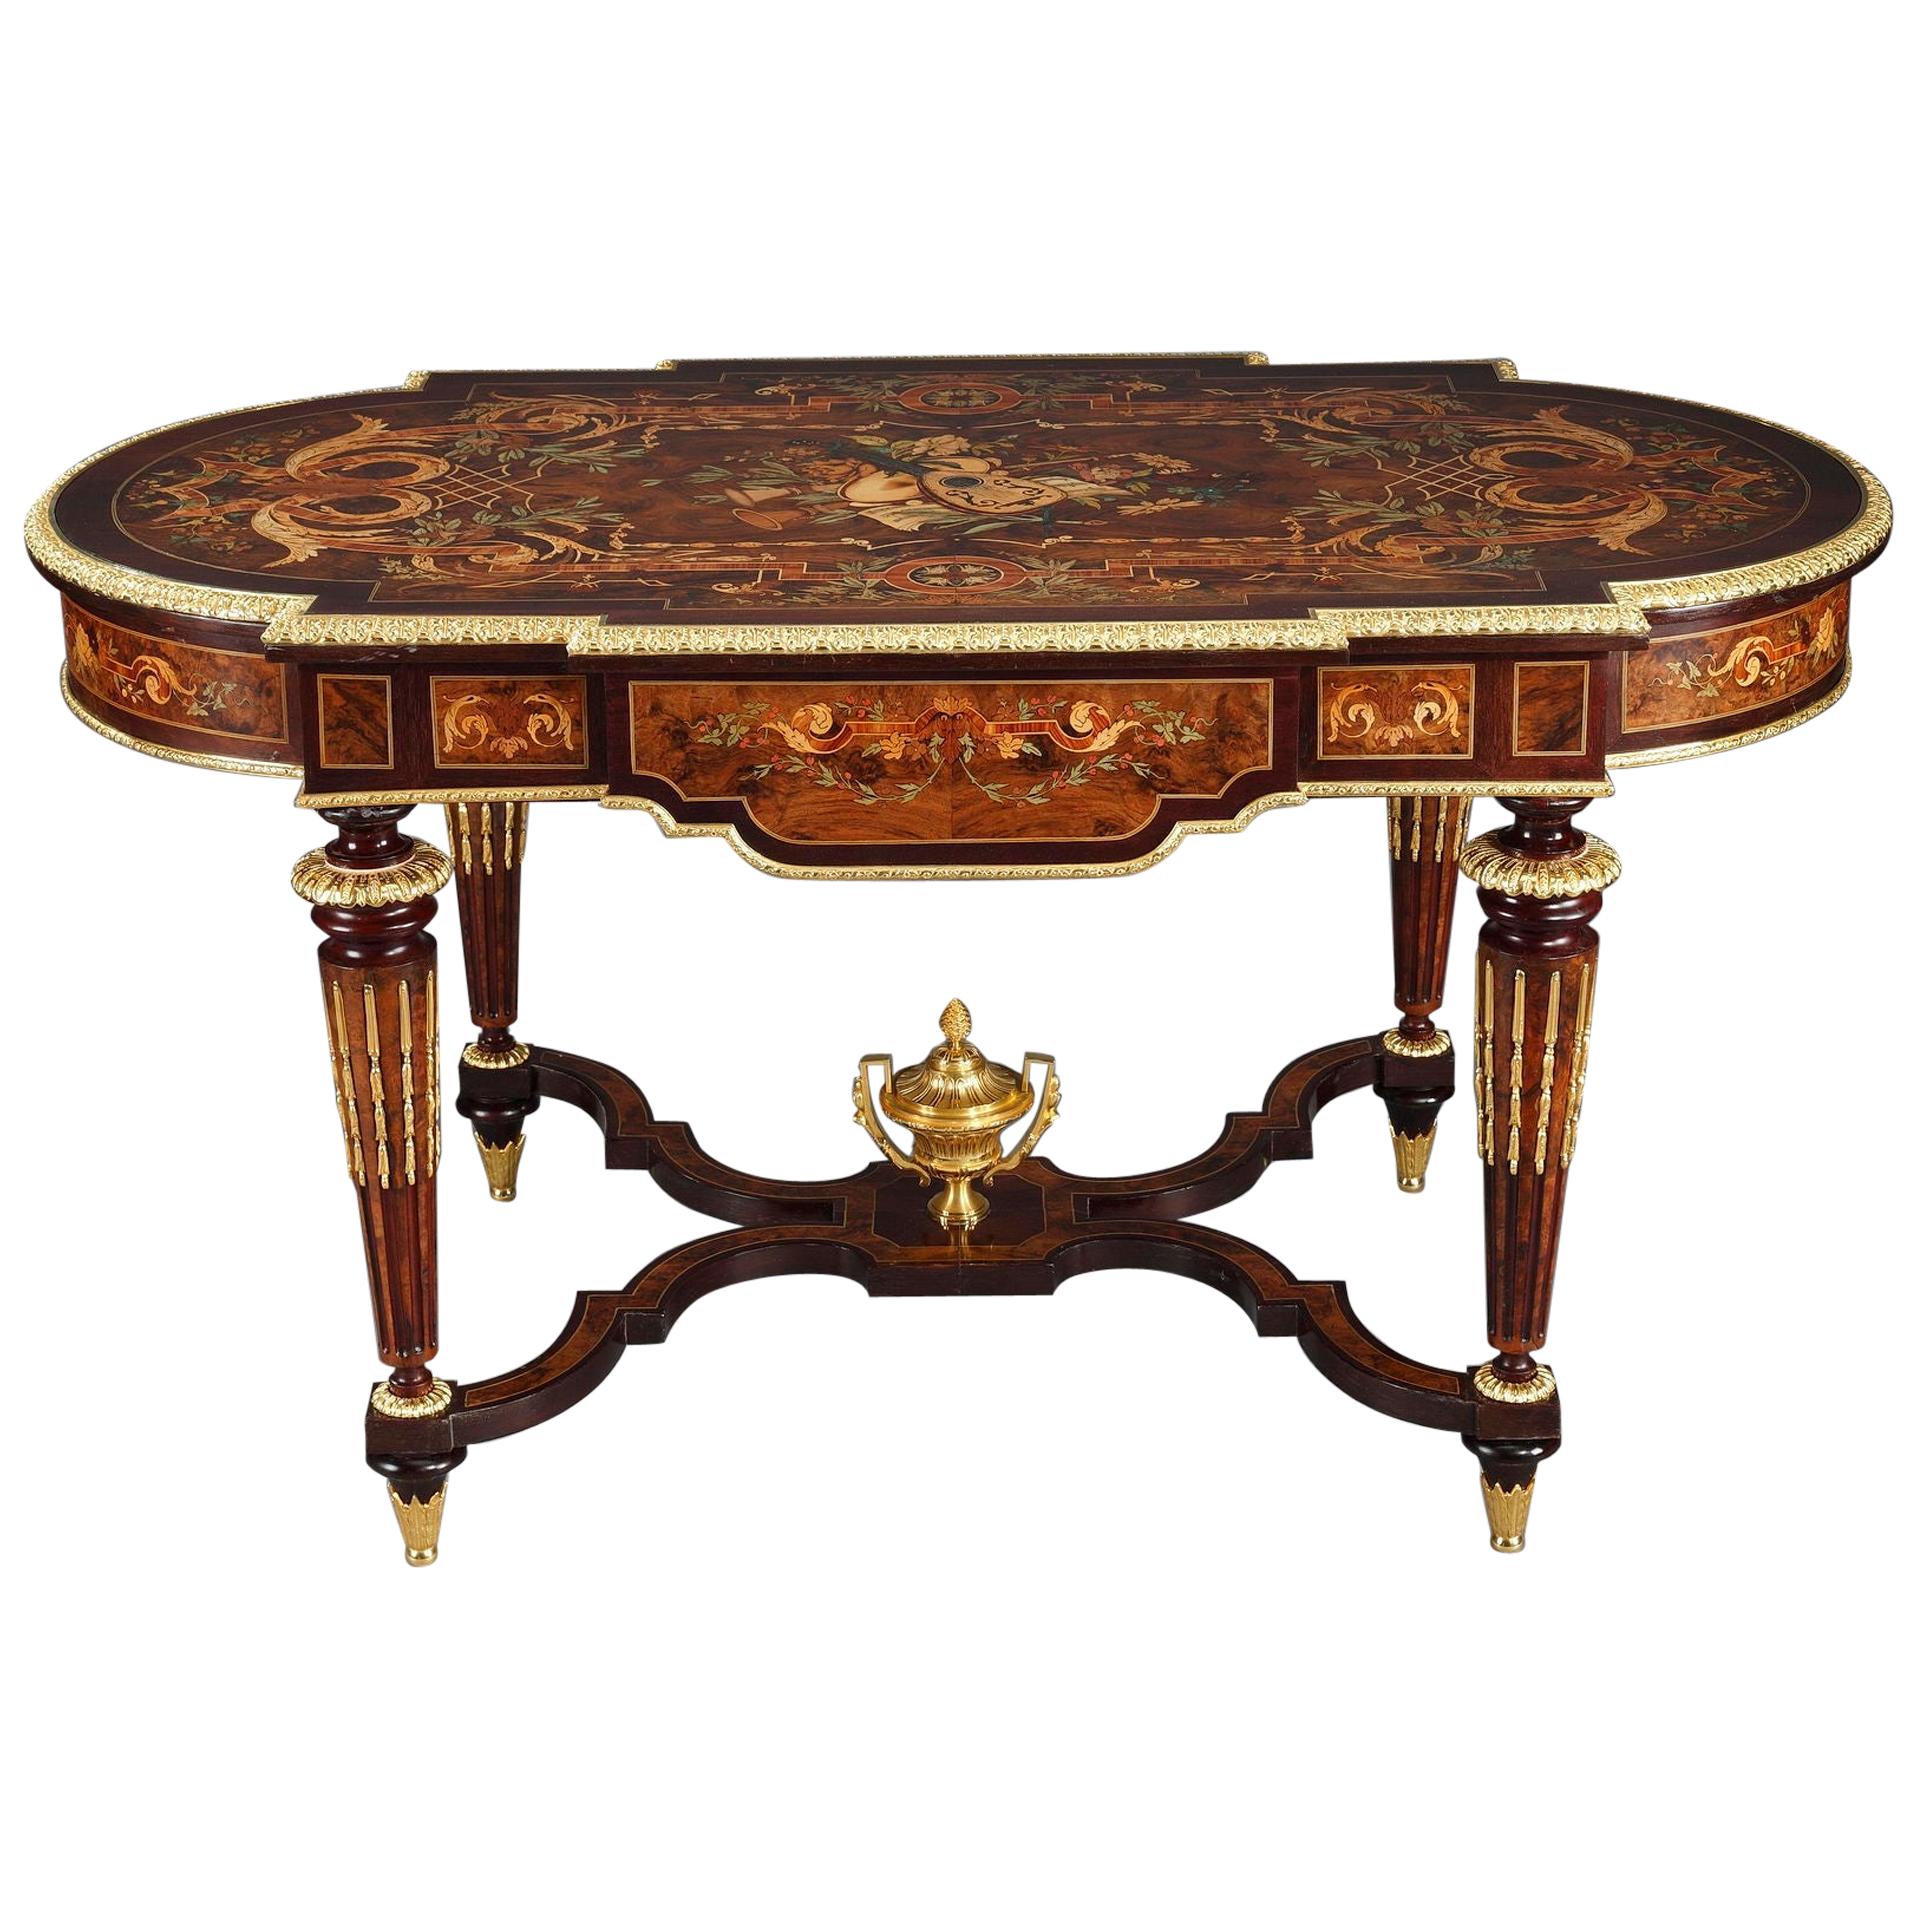 Marquetry Table in Louis XIV Style